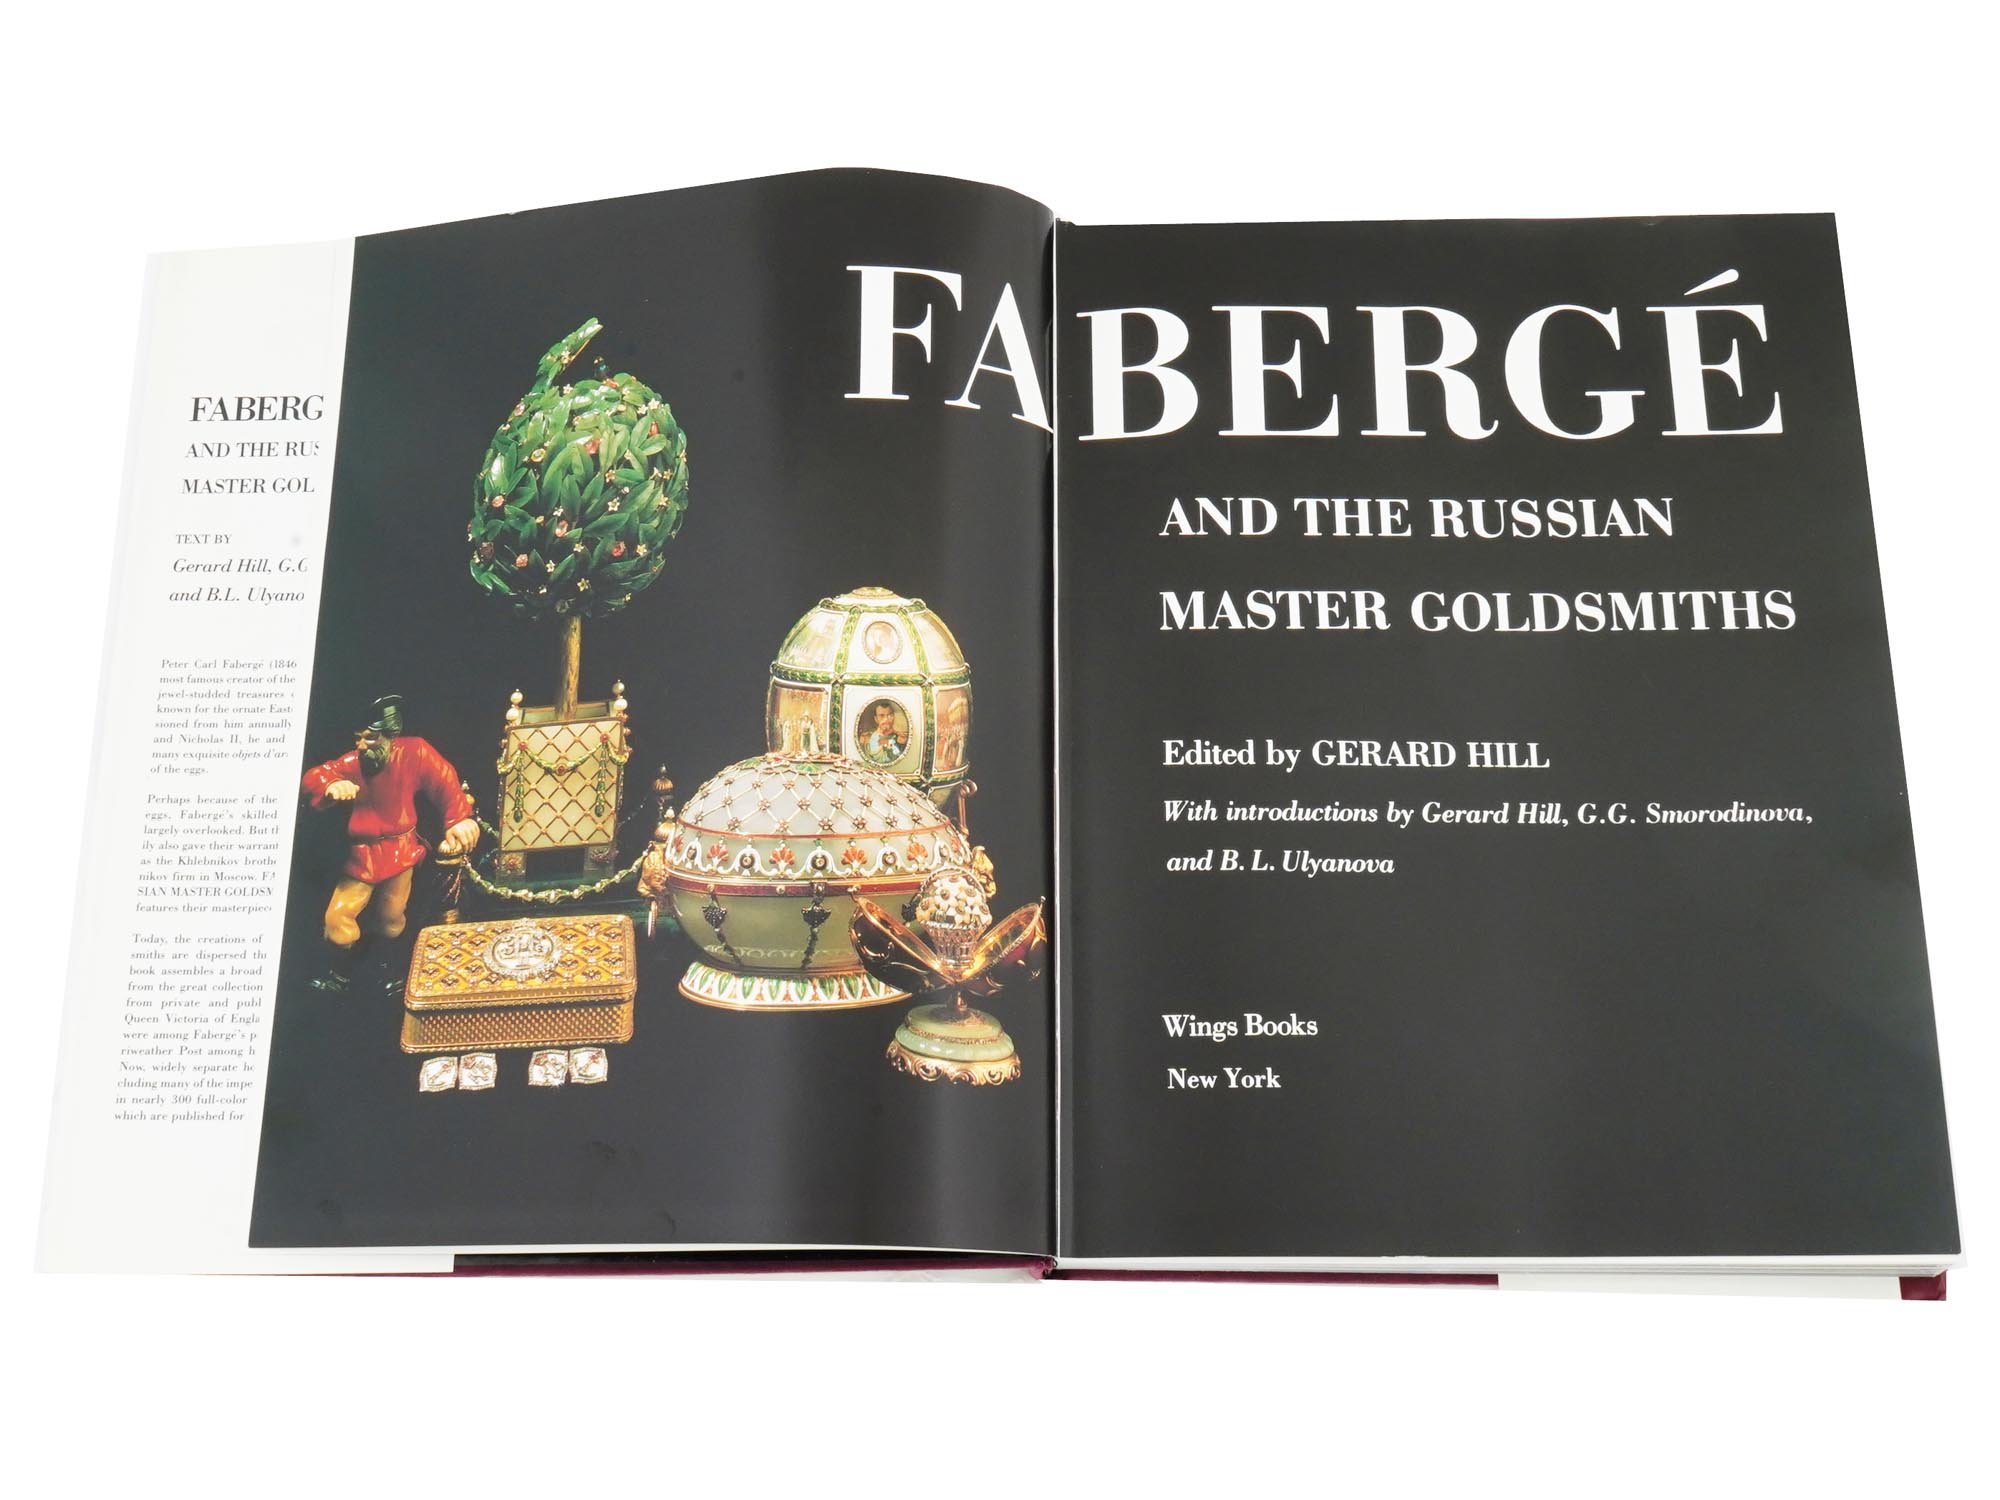 FABERGE AND THE RUSSIAN MASTER GOLDSMITHS ALBUM PIC-2